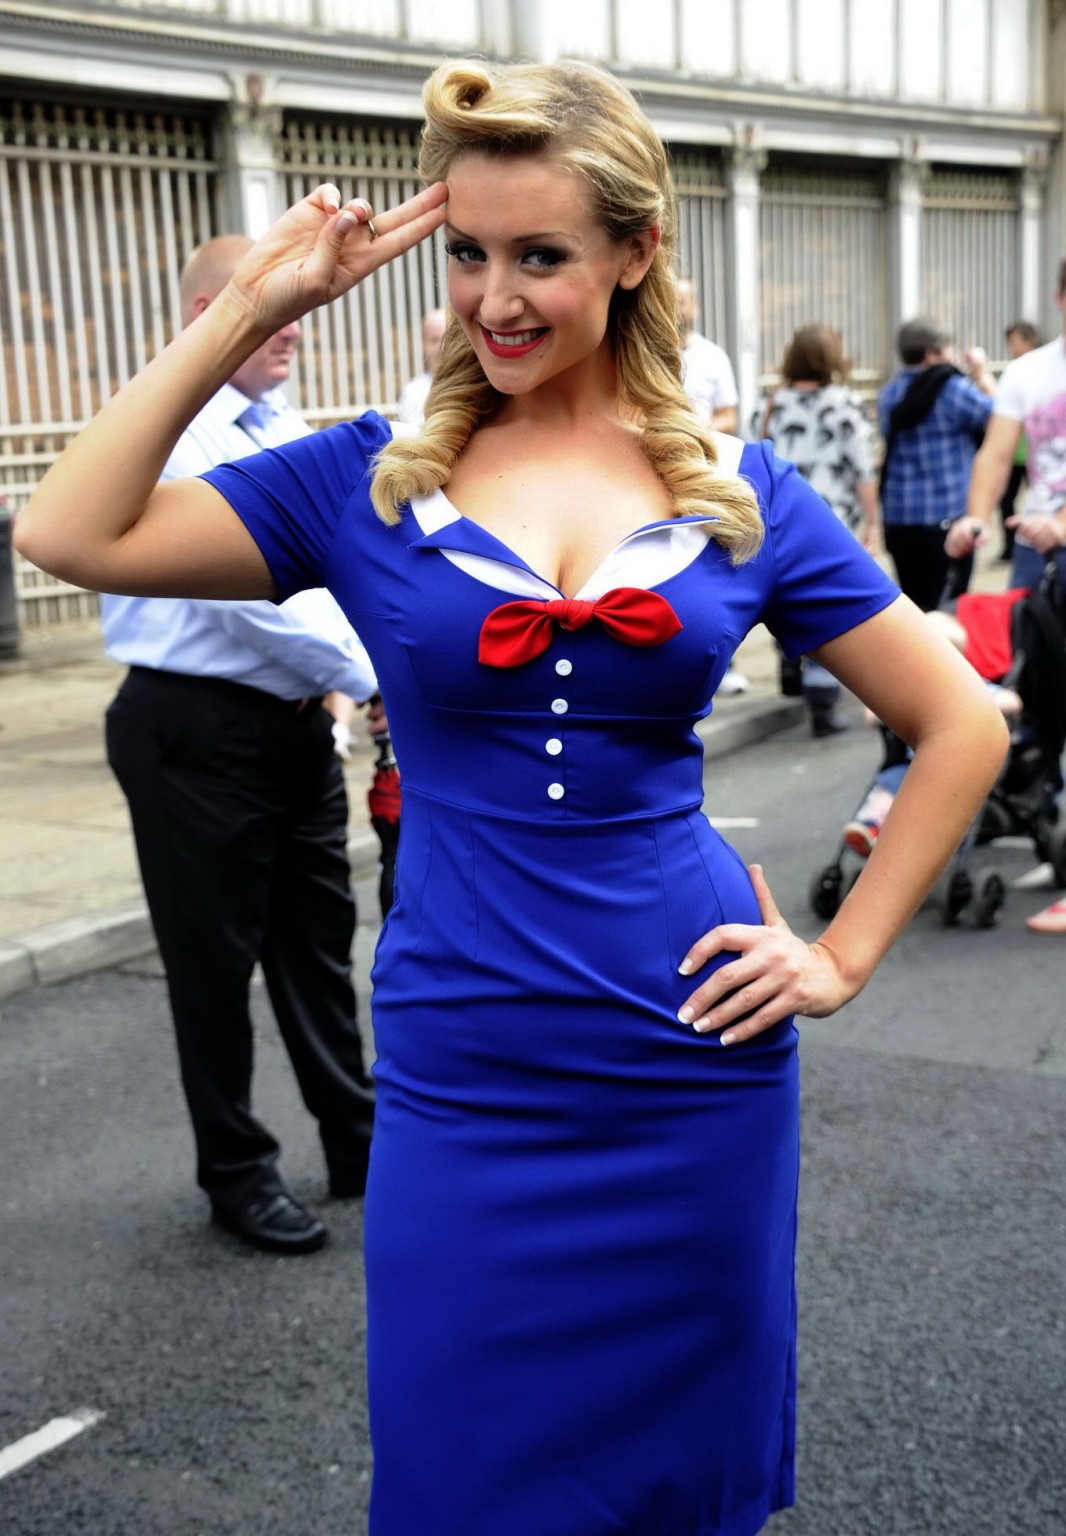 Catherine Tyldesley busty wearing navy uniform at Manchester Pride #75253824